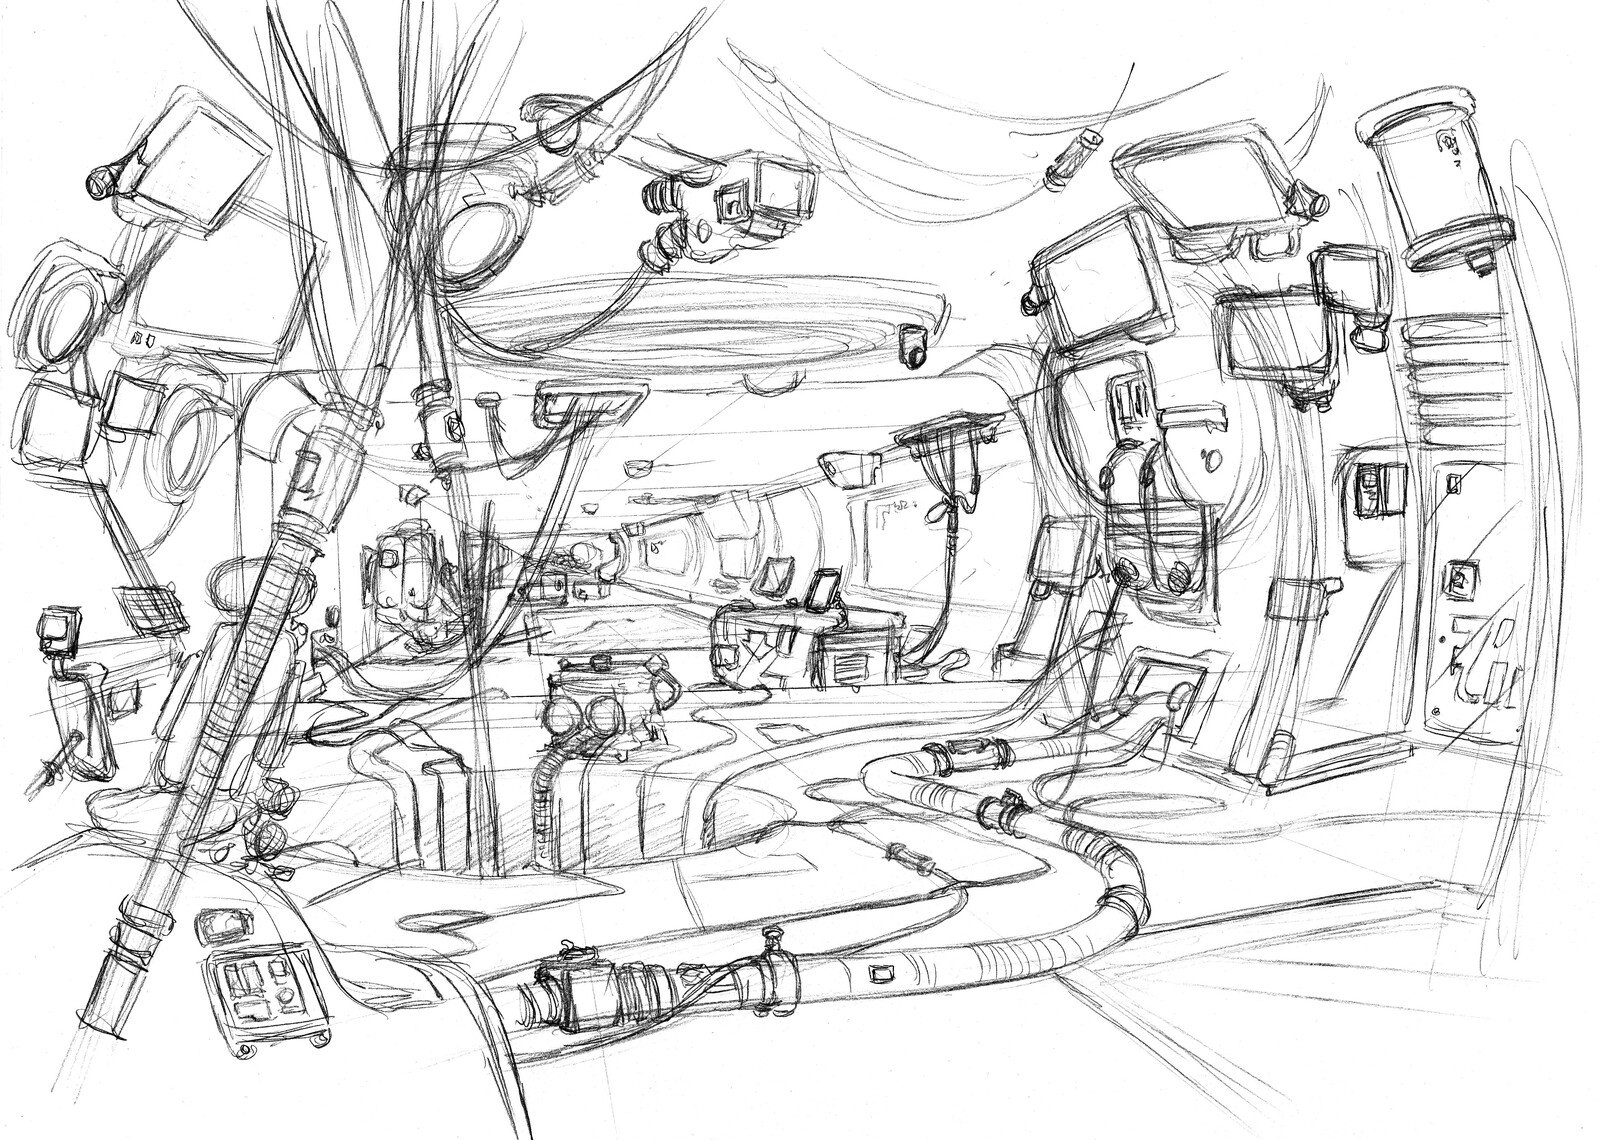 An early pencil sketch for the rear interior of the ship...